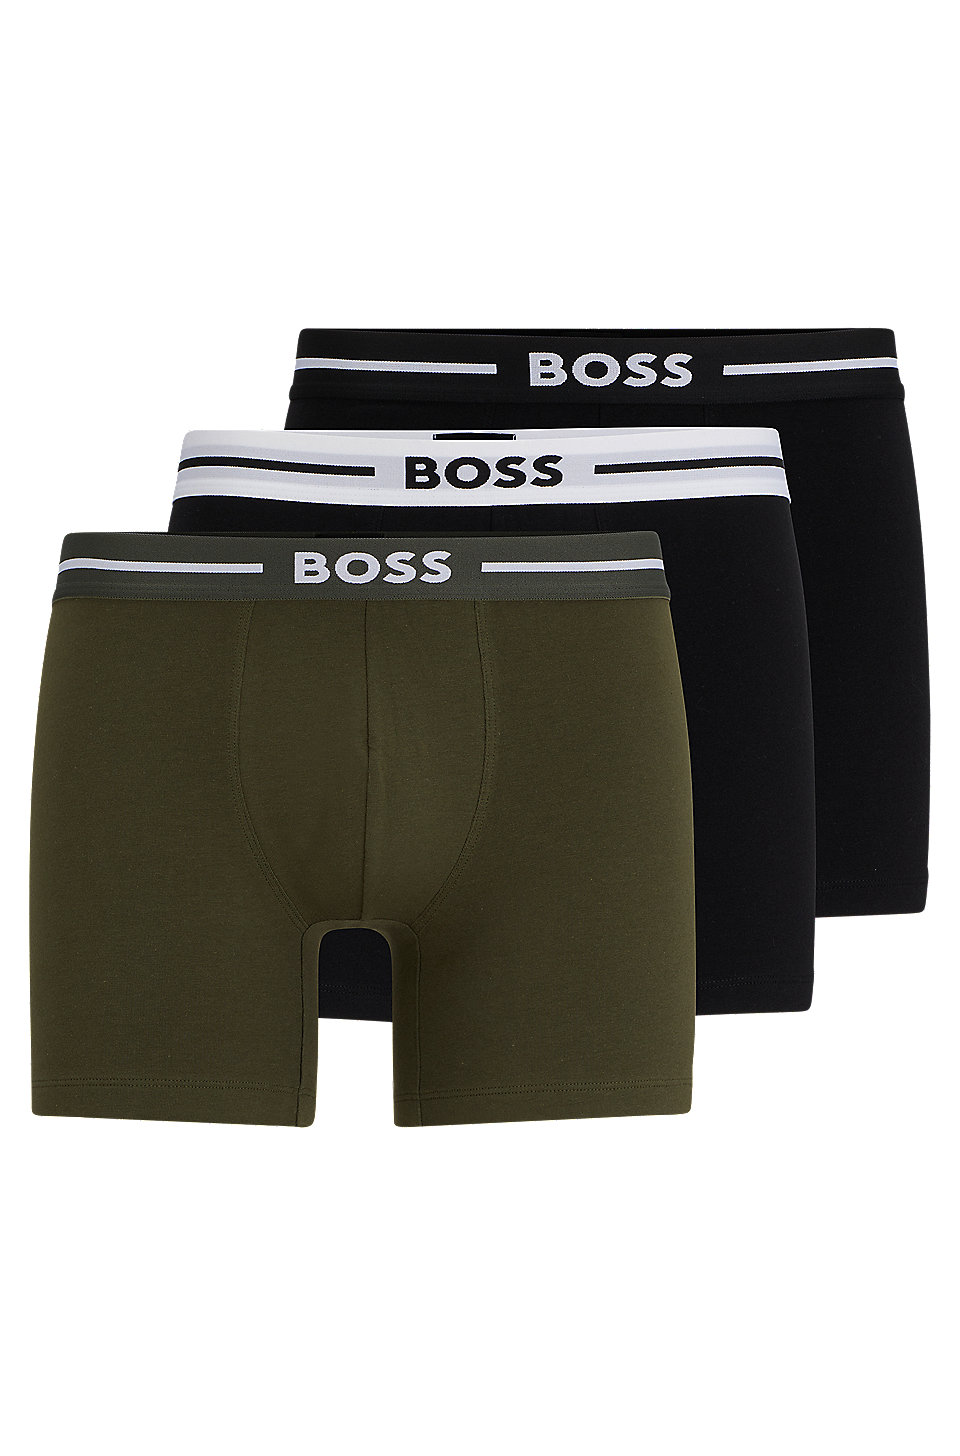 BOSS - Three-pack of boxer briefs in stretch cotton